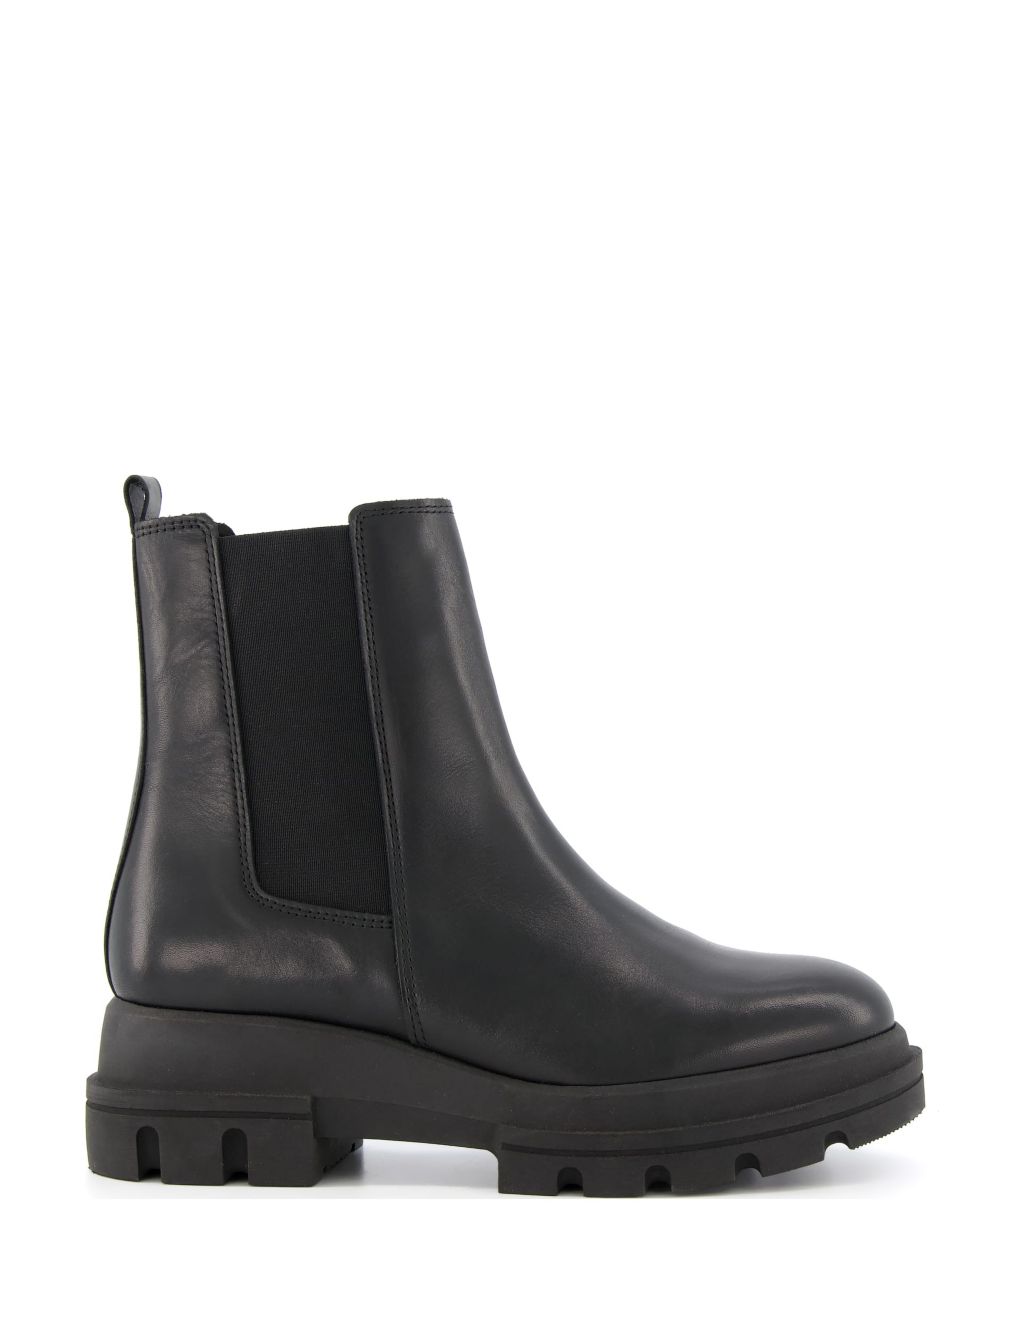 Leather Chelsea Platform Ankle Boots image 1